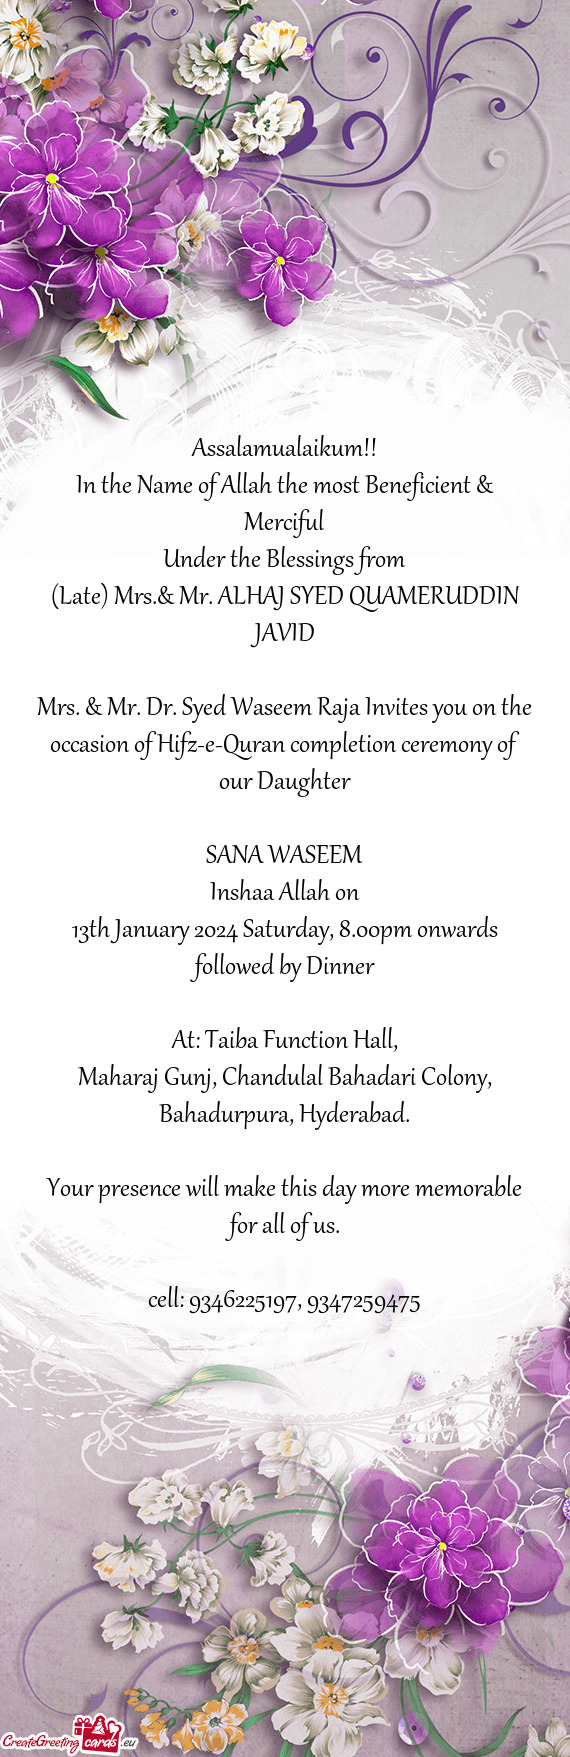 Mrs. & Mr. Dr. Syed Waseem Raja Invites you on the occasion of Hifz-e-Quran completion ceremony of o